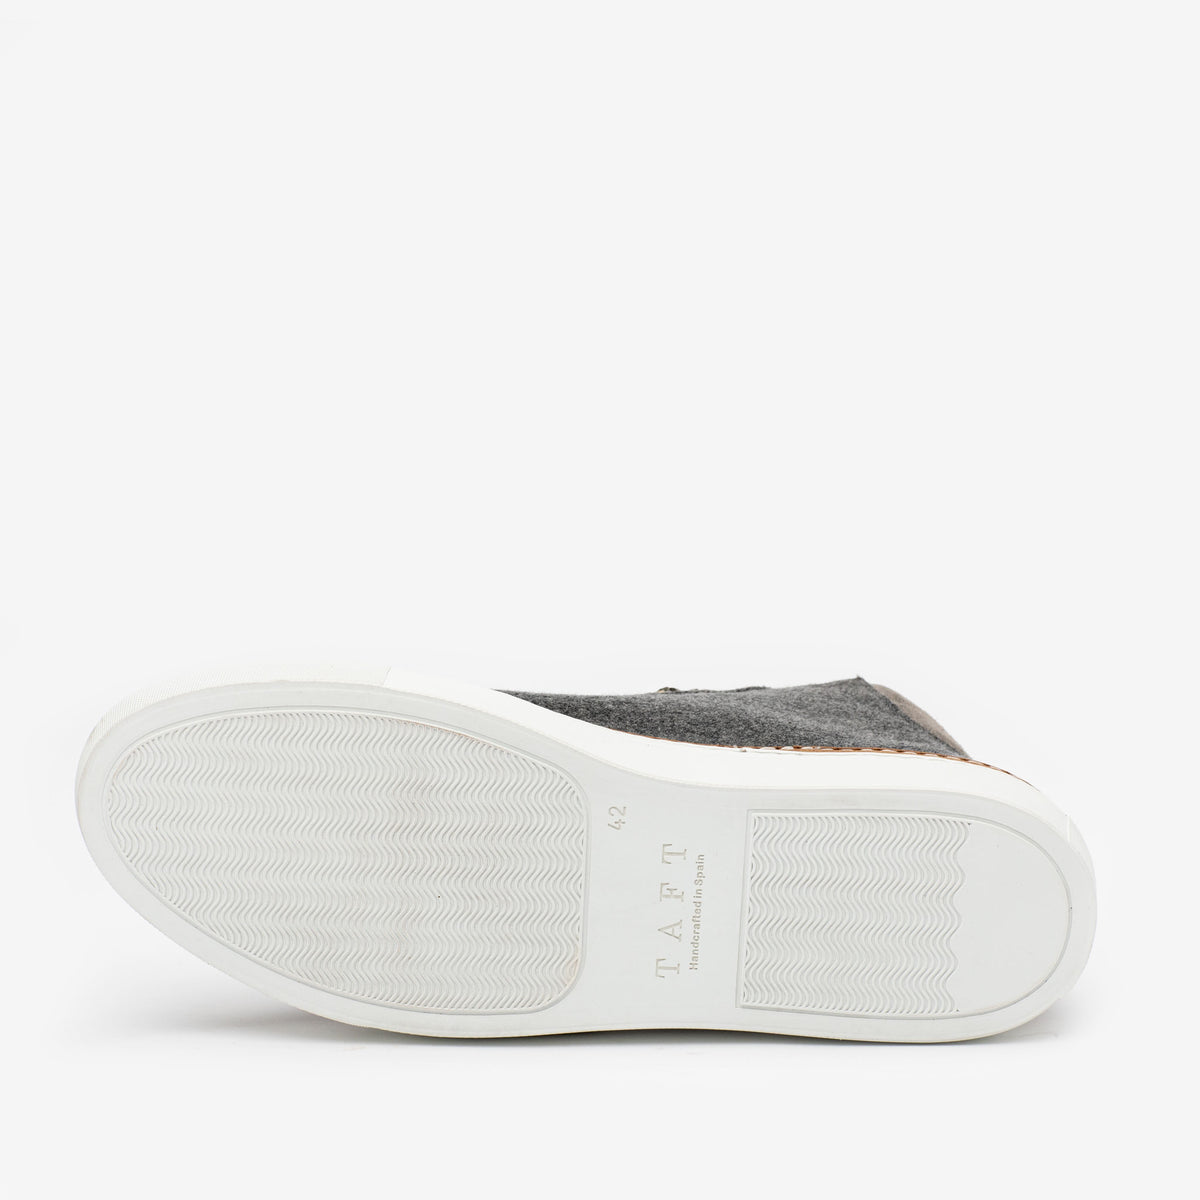 The Base Camp Sneaker in Grey Sole